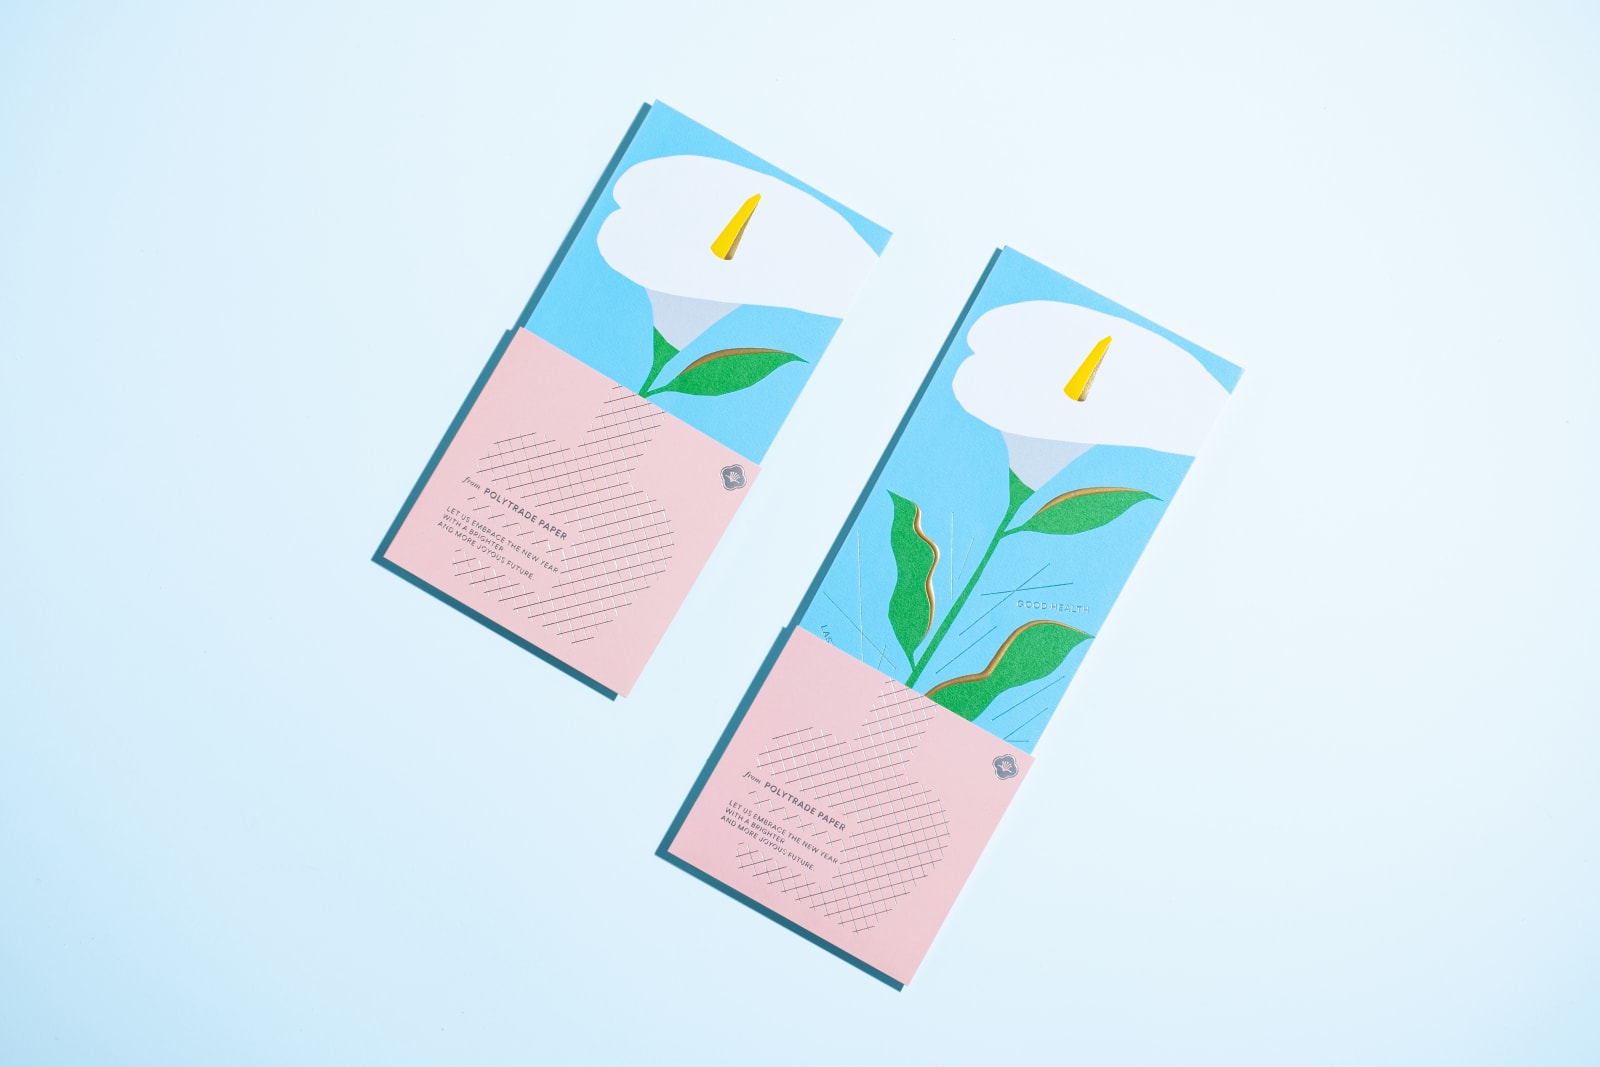 Share The Joy of Floral - Red Packet Design, studiowmw / Hong Kong